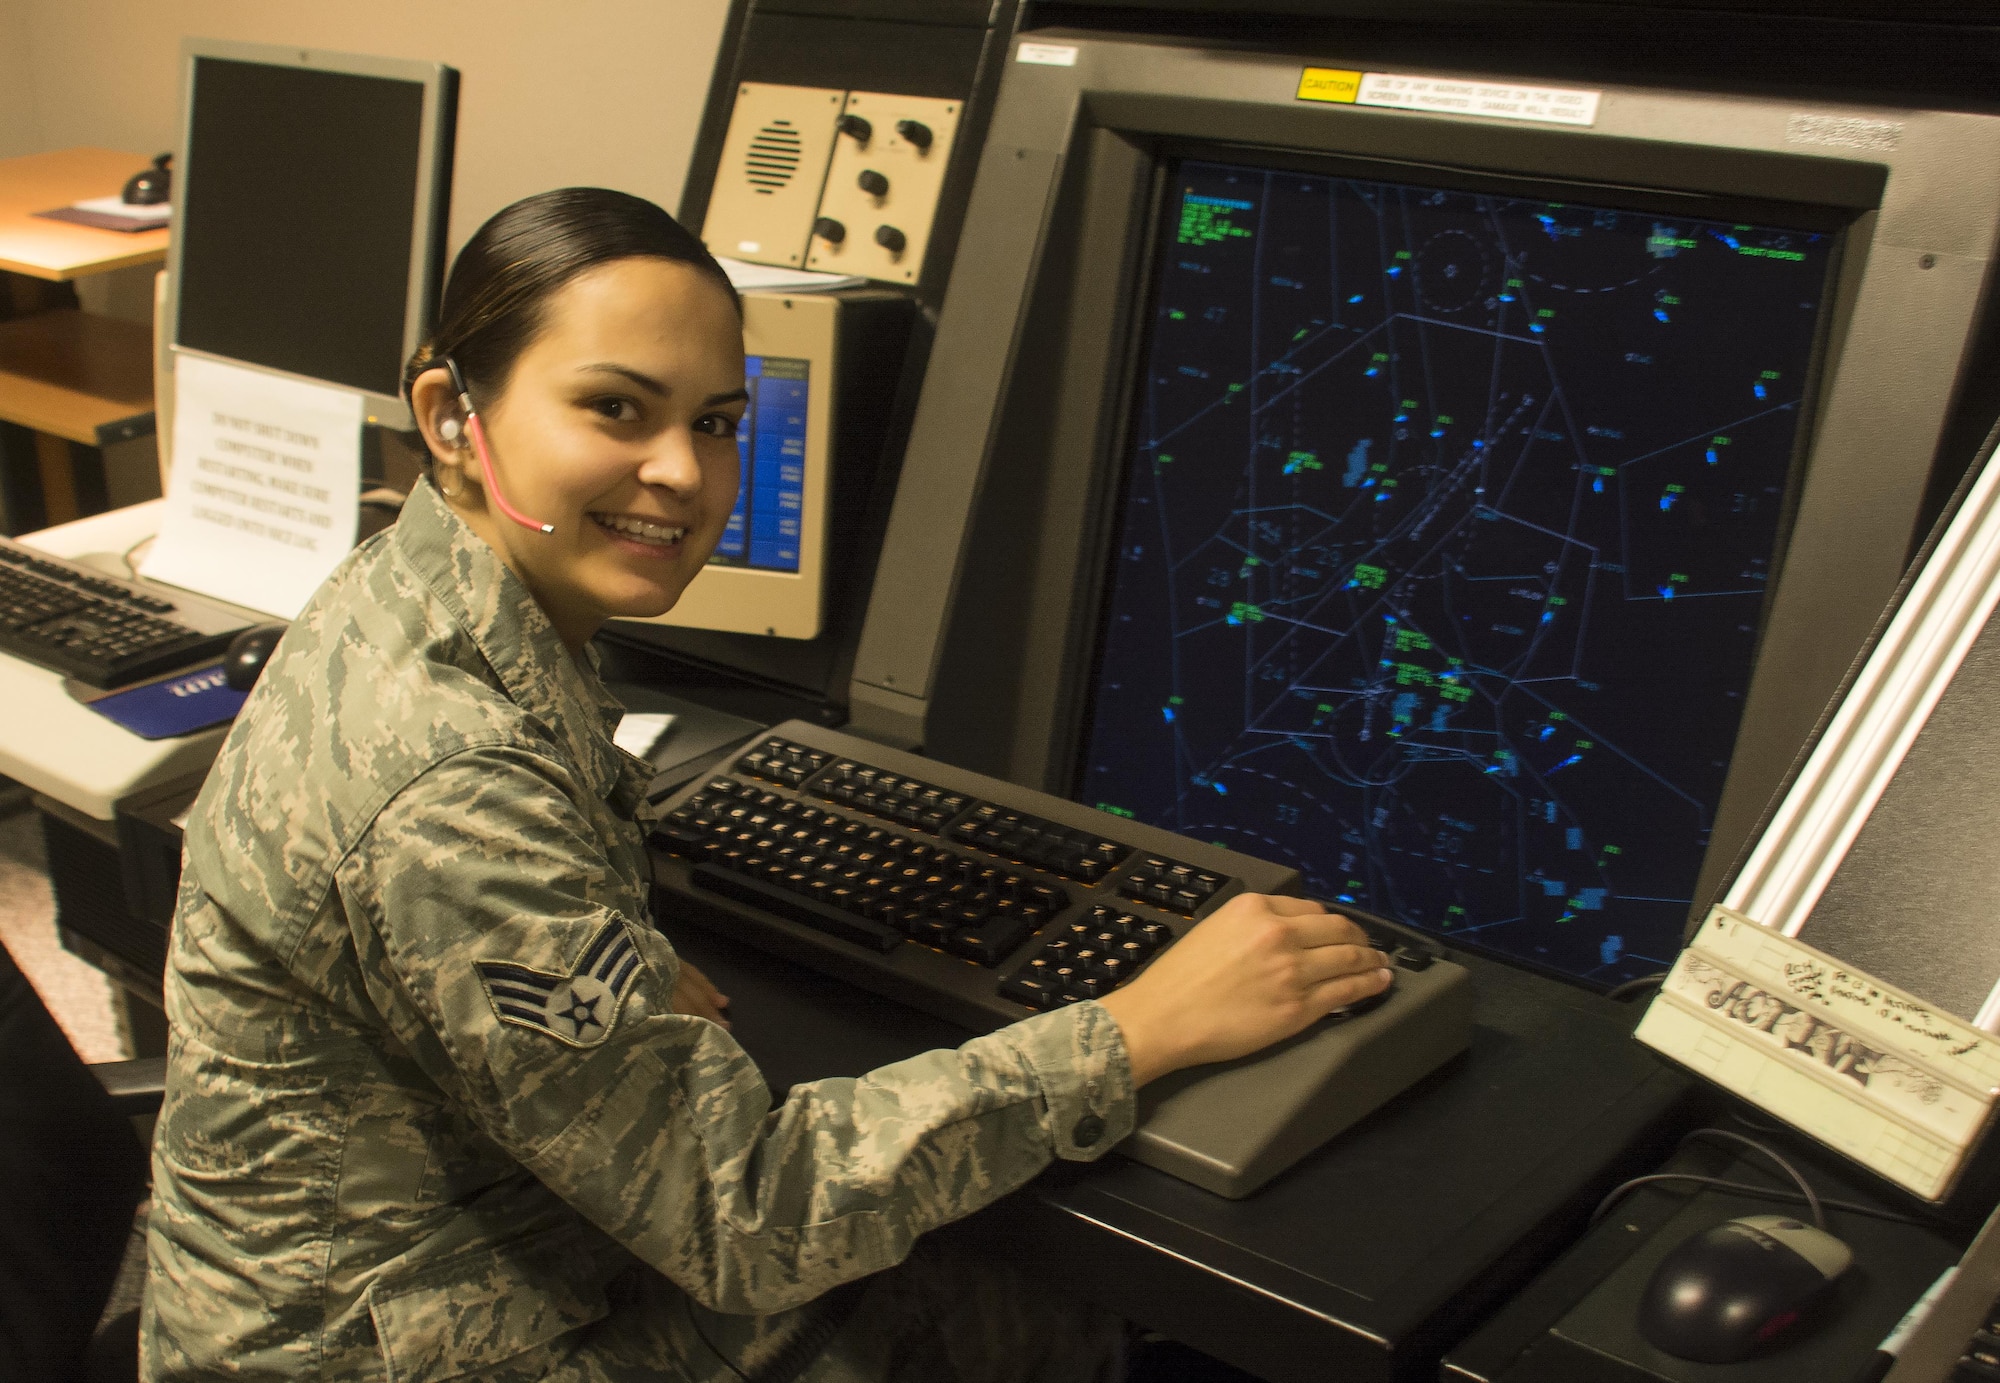 Senior Airman Marissa N. Varnes, 60th Operations Support Squadron air traffic controller, tracks the path of aircraft leaving and landing in the Travis Air Force Base airspace Oct. 24. Due to the high volume of aid offered by Travis to those devastated by recent natural disasters, the air traffic controllers on base were a greatly needed asset in projecting rapid mobility to those affected areas.